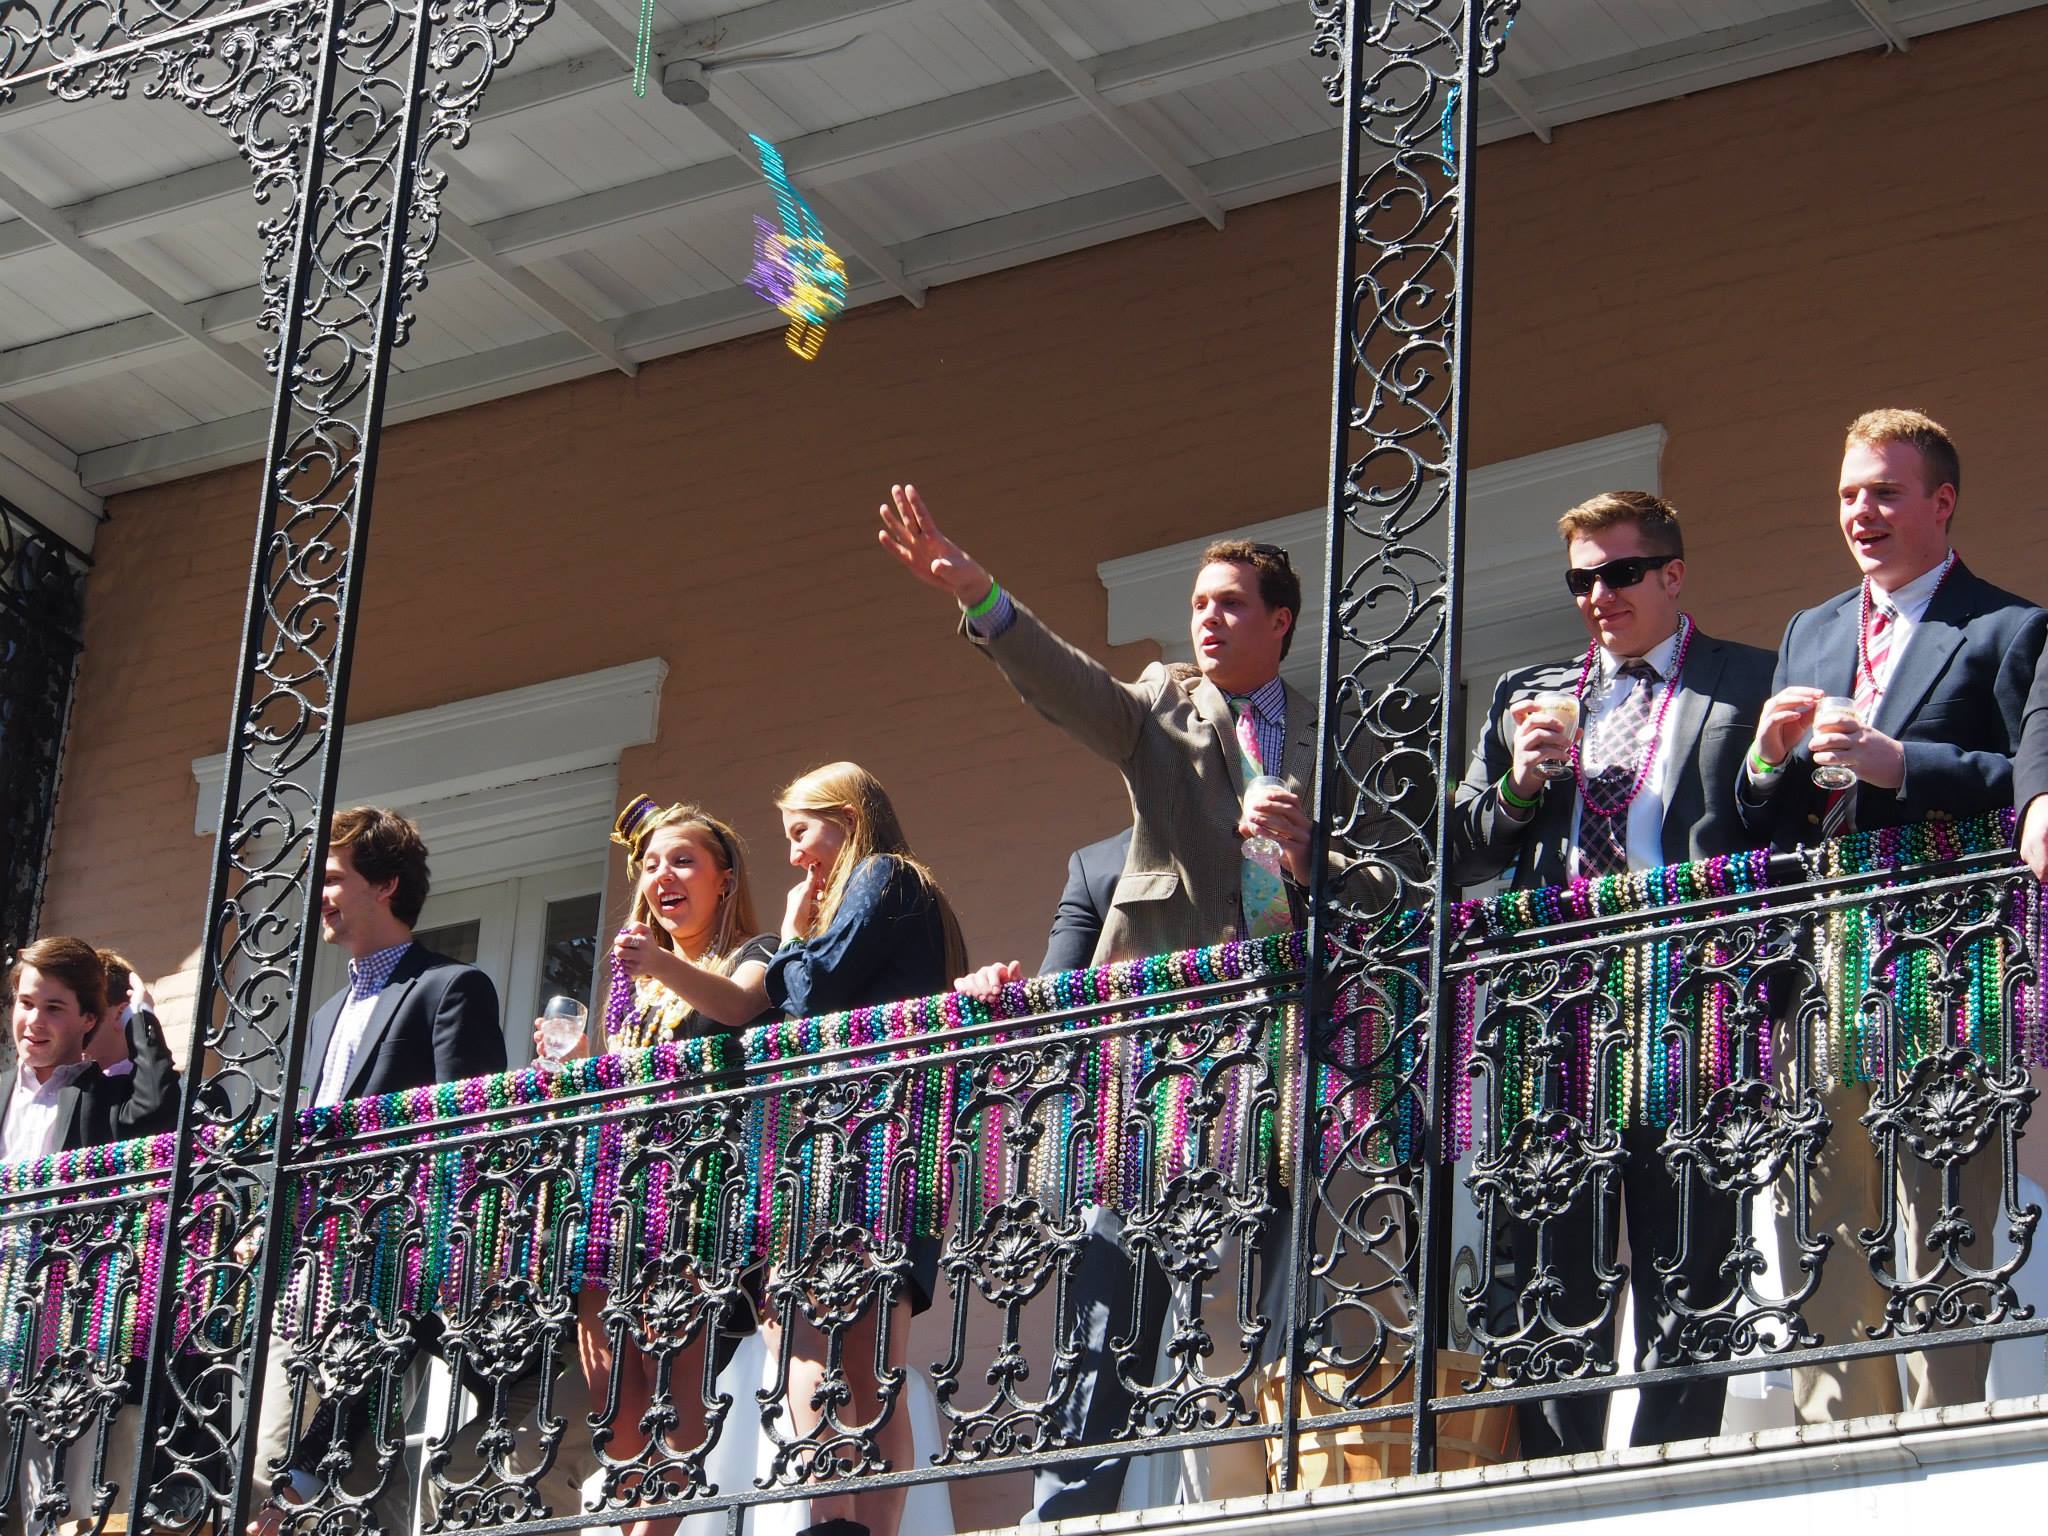 mardi-gras-throwing-beads-new-orleans